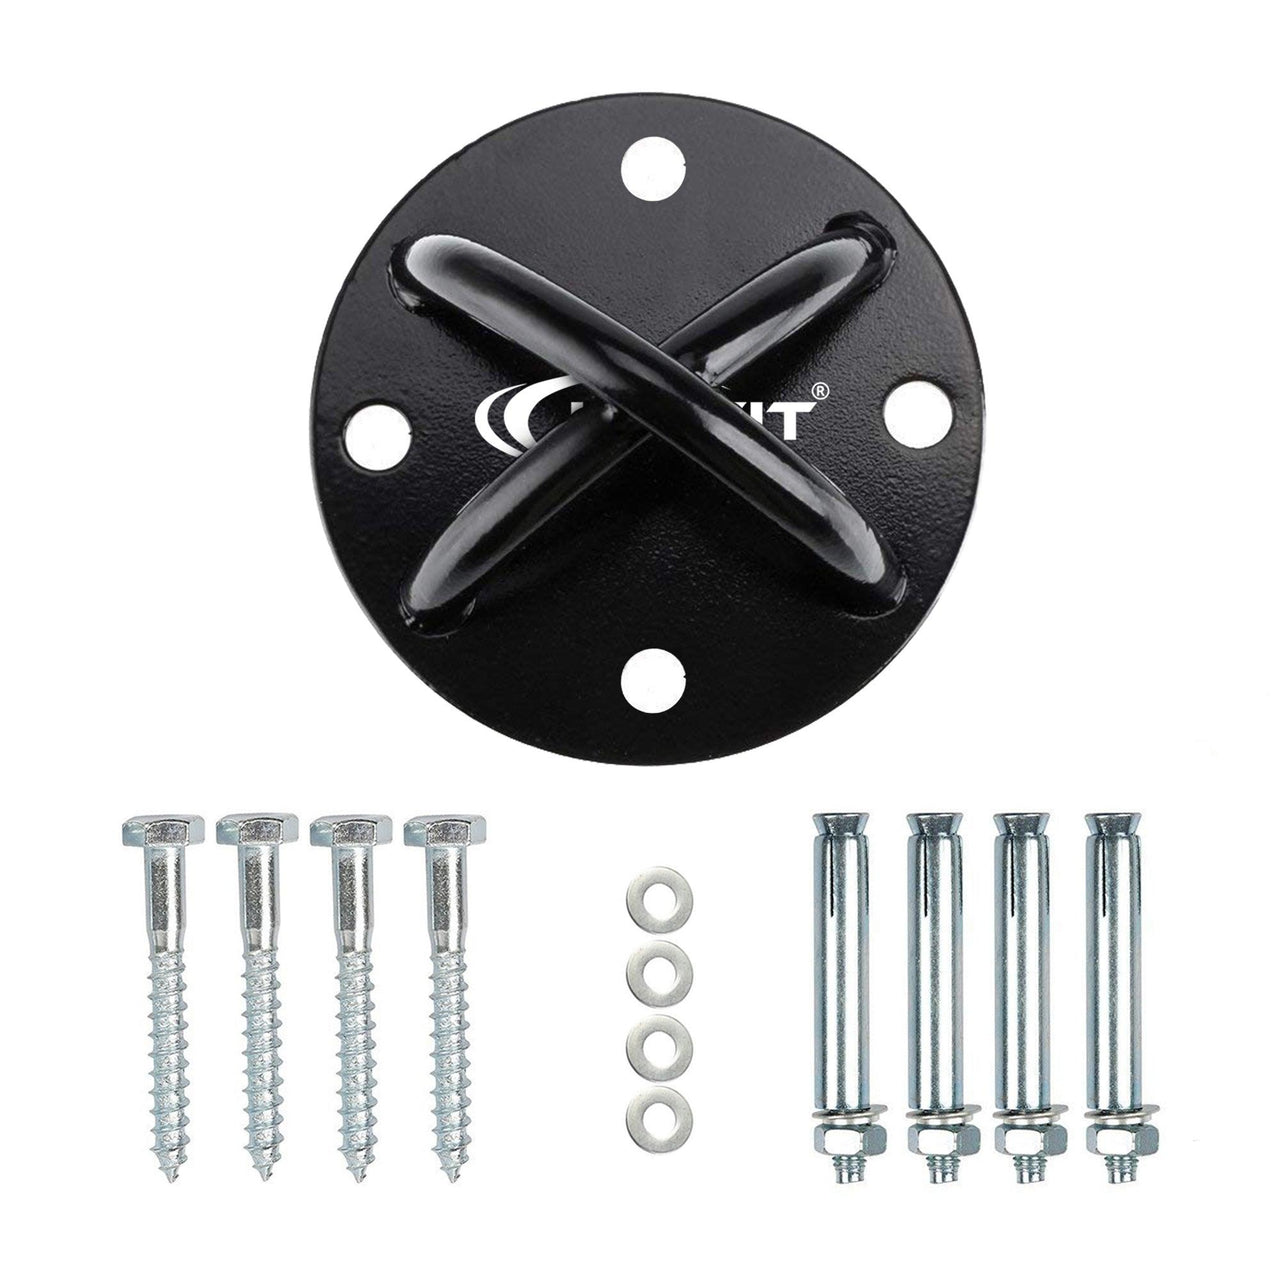 Wall Mount Anchor with bolt and screws - Joyfit